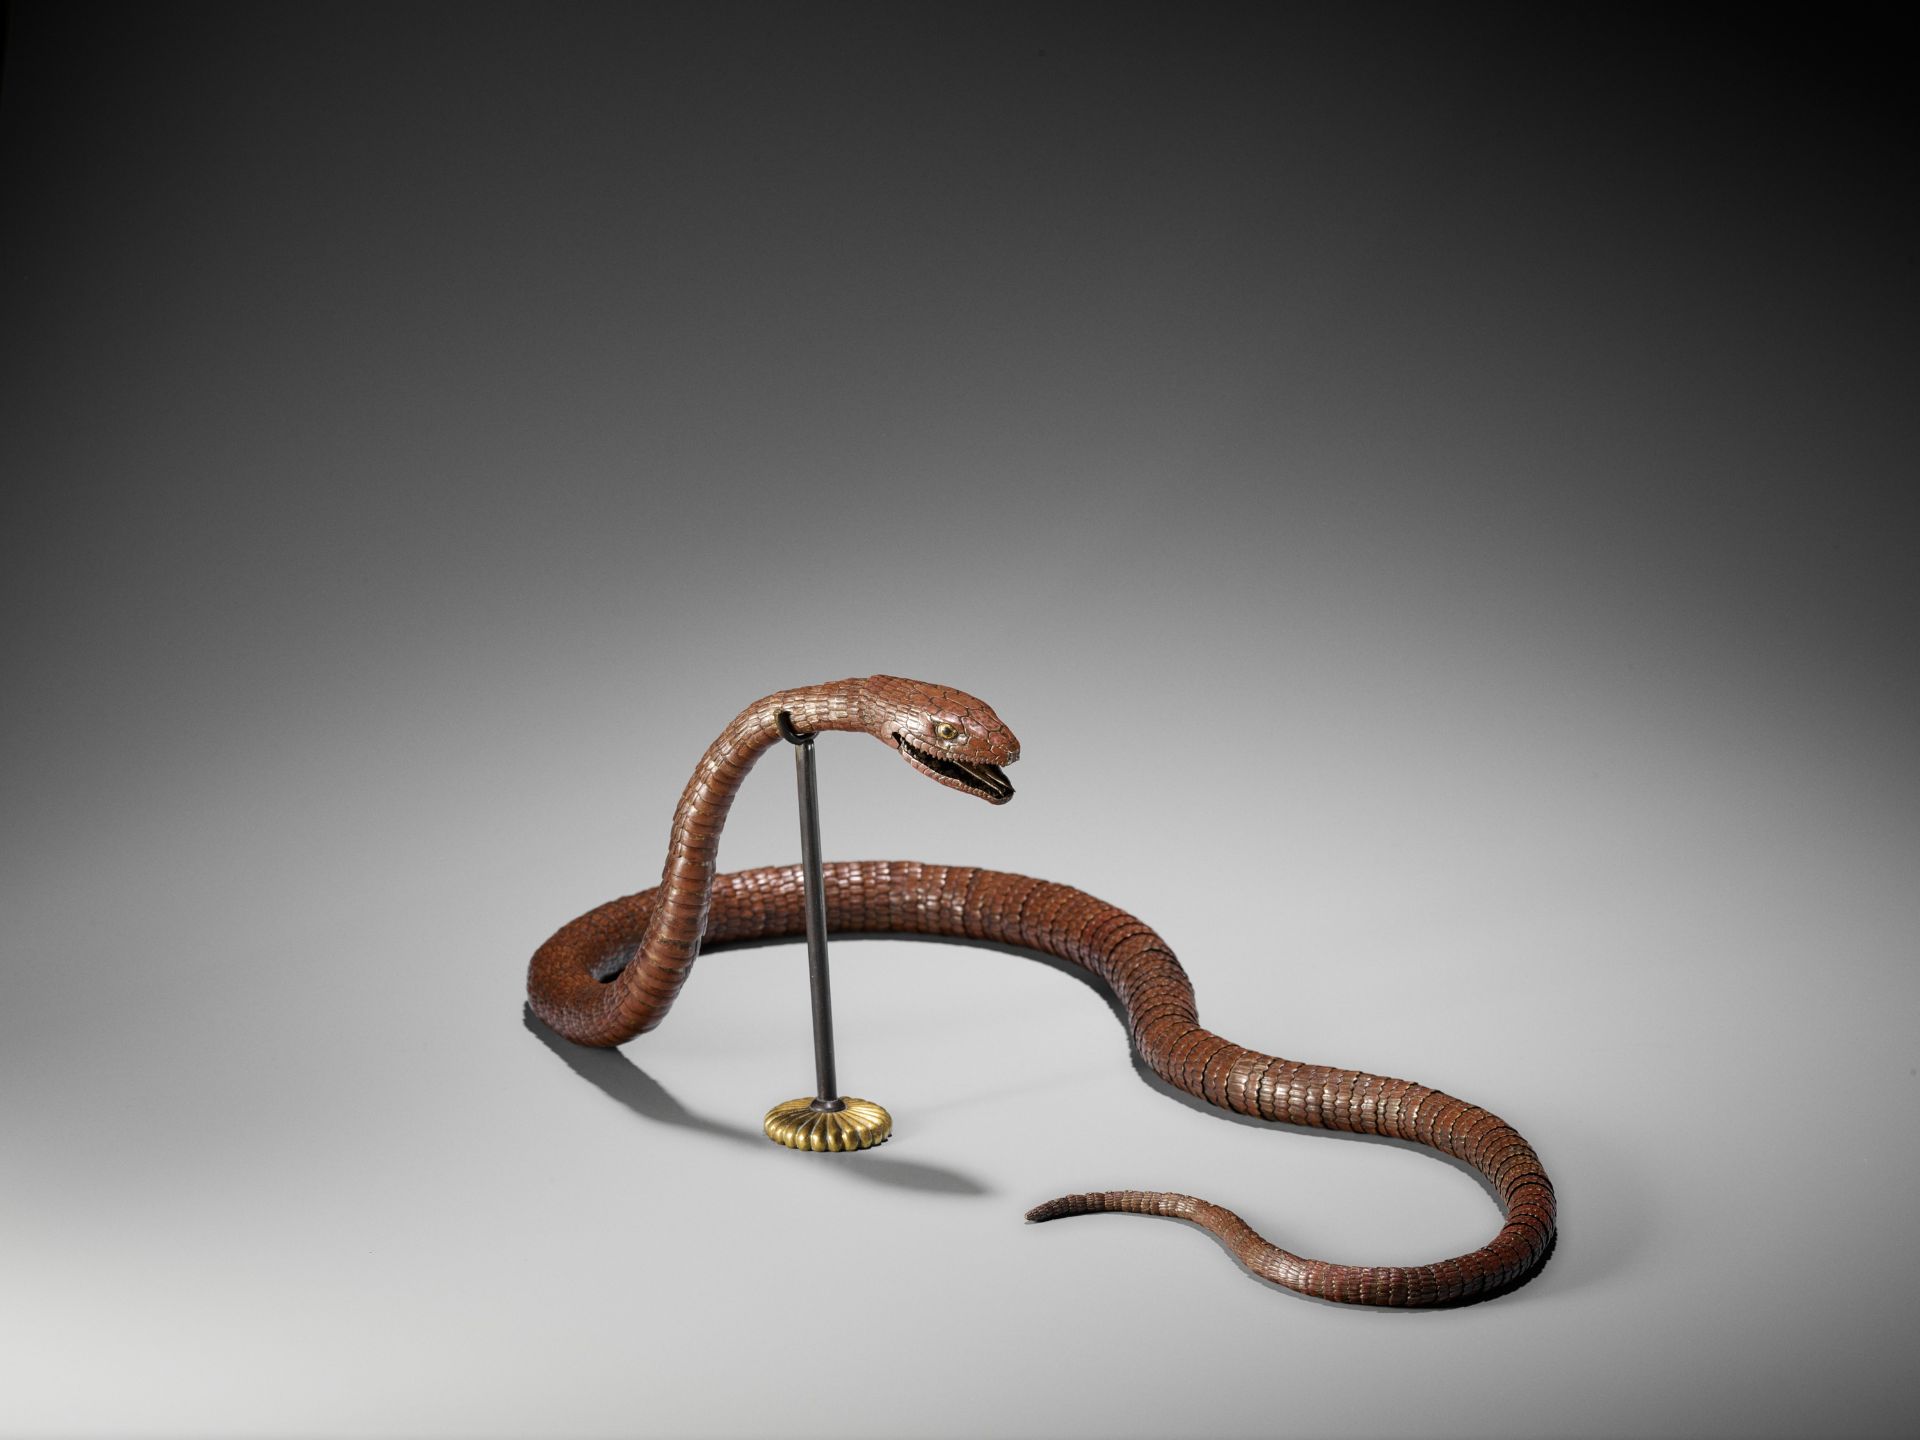 A RARE AND IMPRESSIVE PATINATED BRONZE ARTICULATED MODEL OF A SNAKE - Image 3 of 7